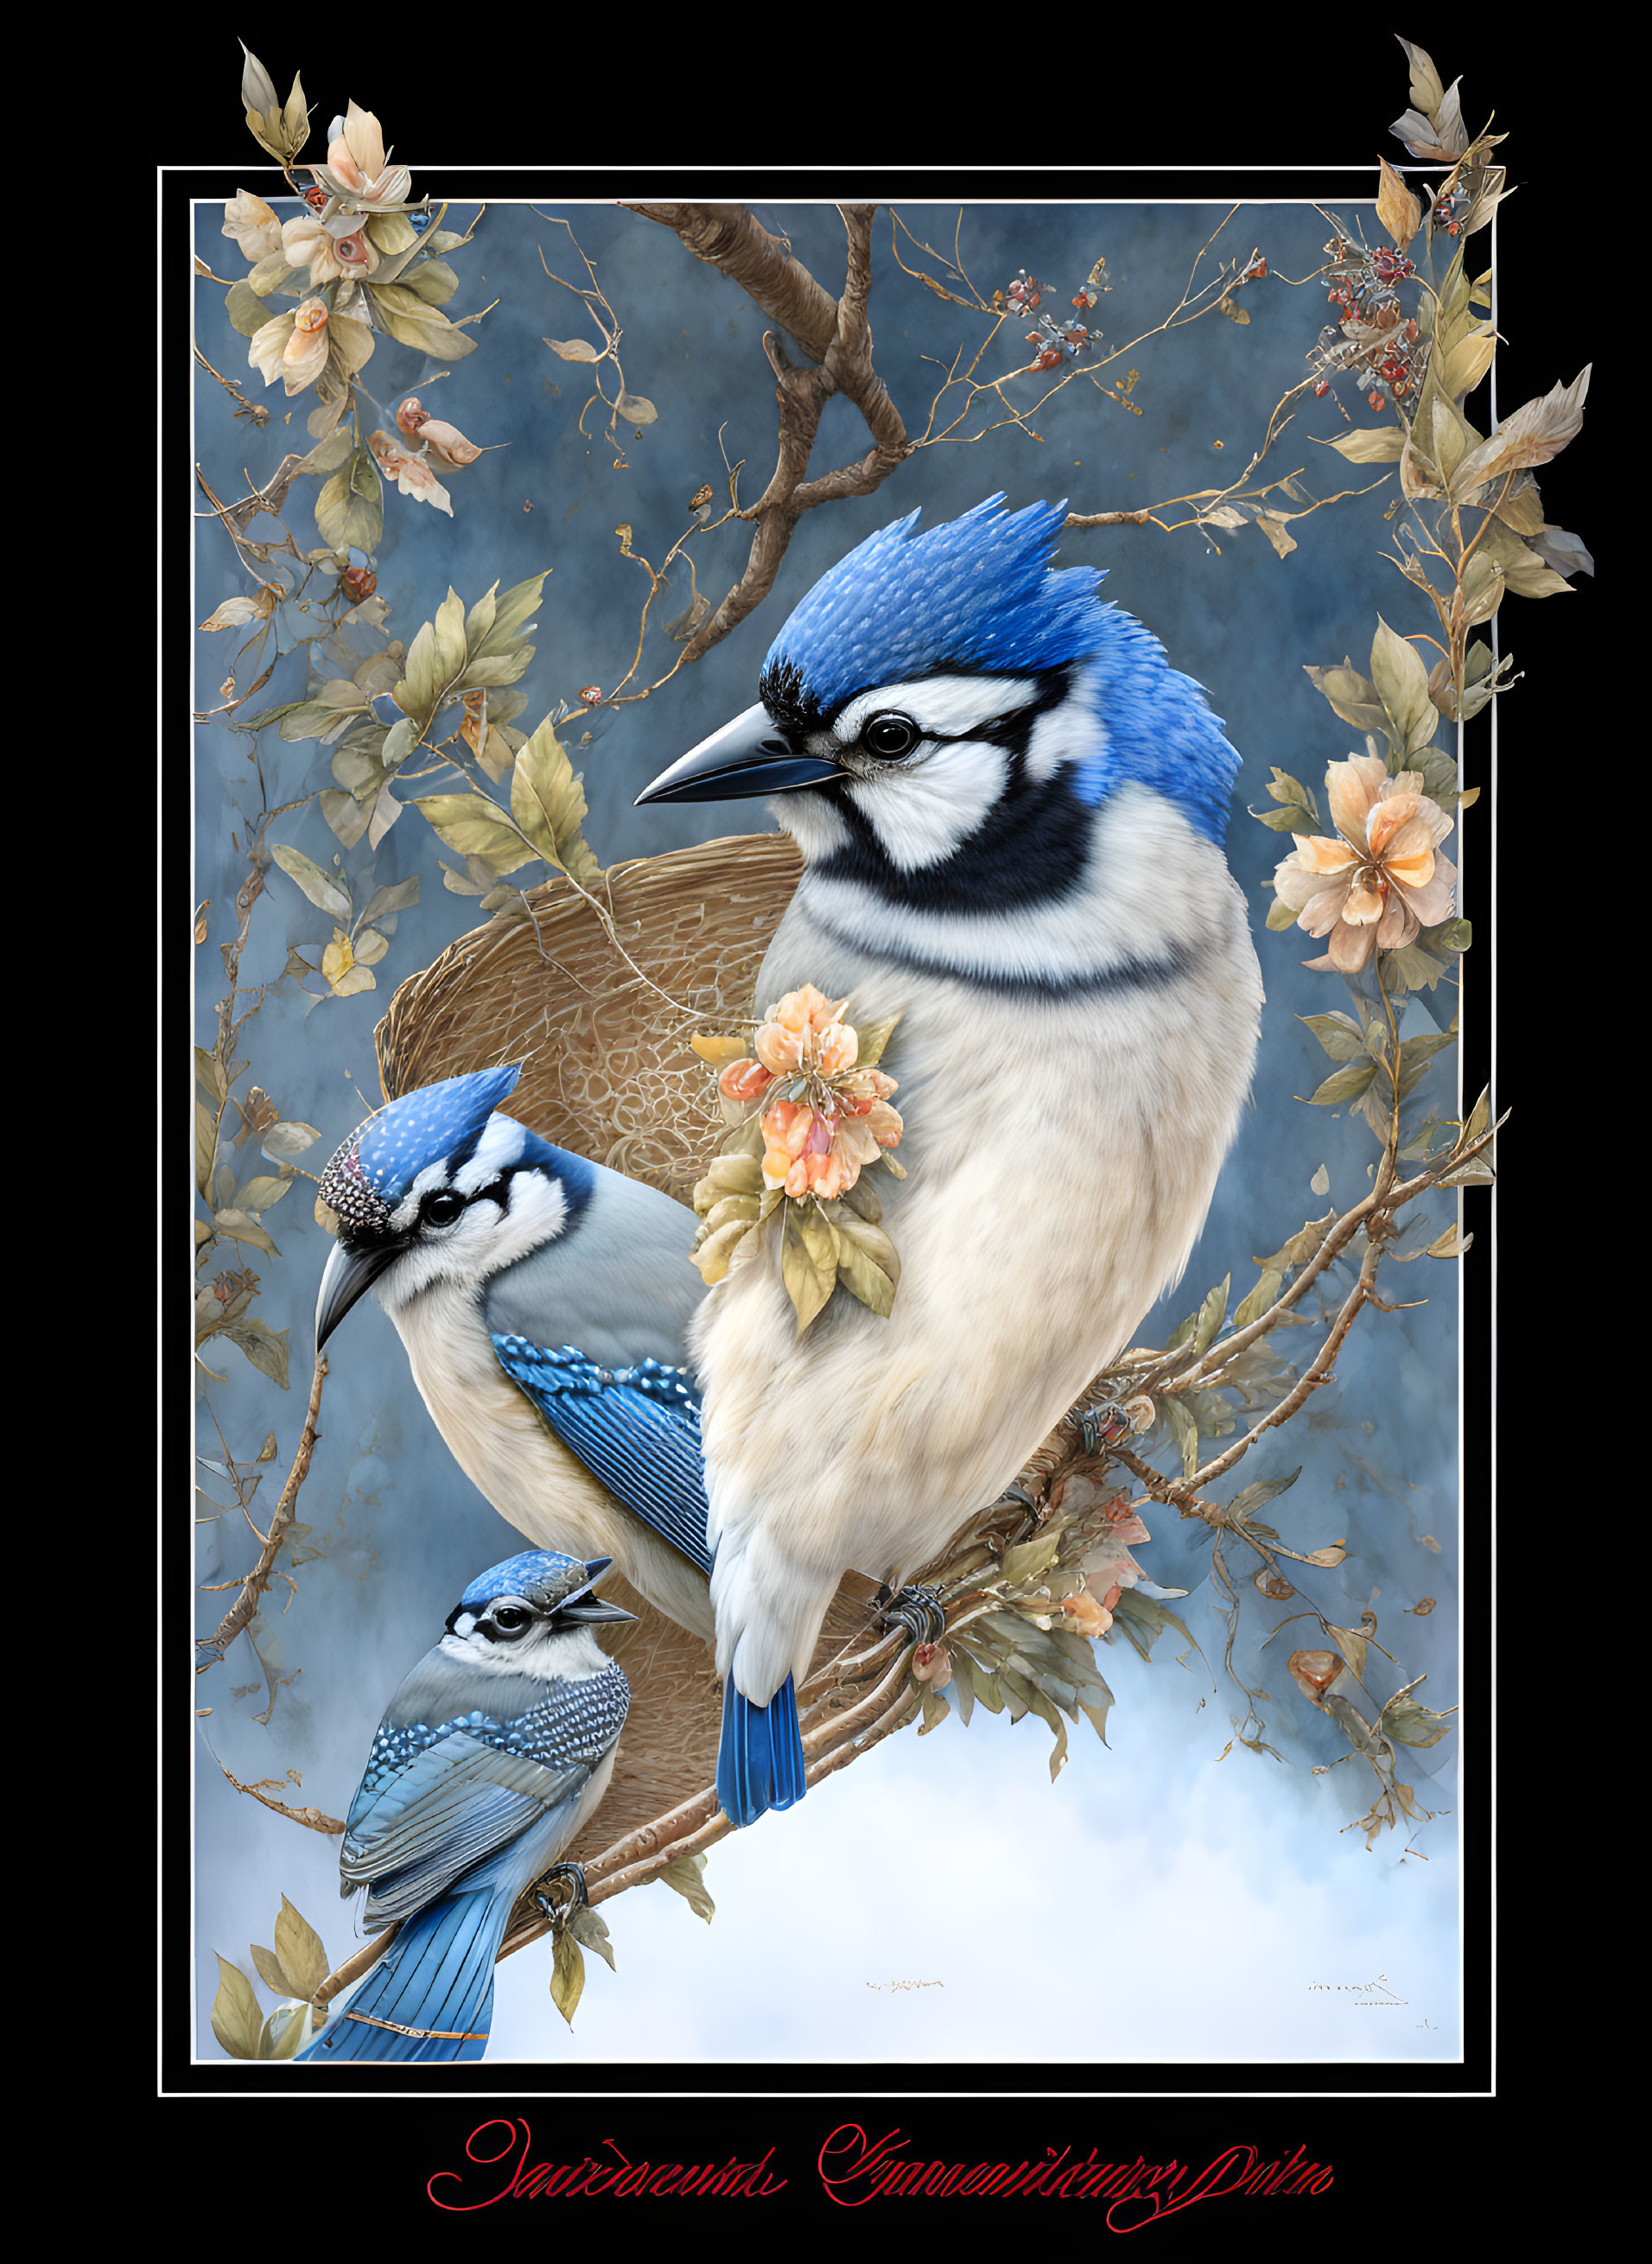 Two blue jays in blossoming branches on cool blue background with floral motifs.